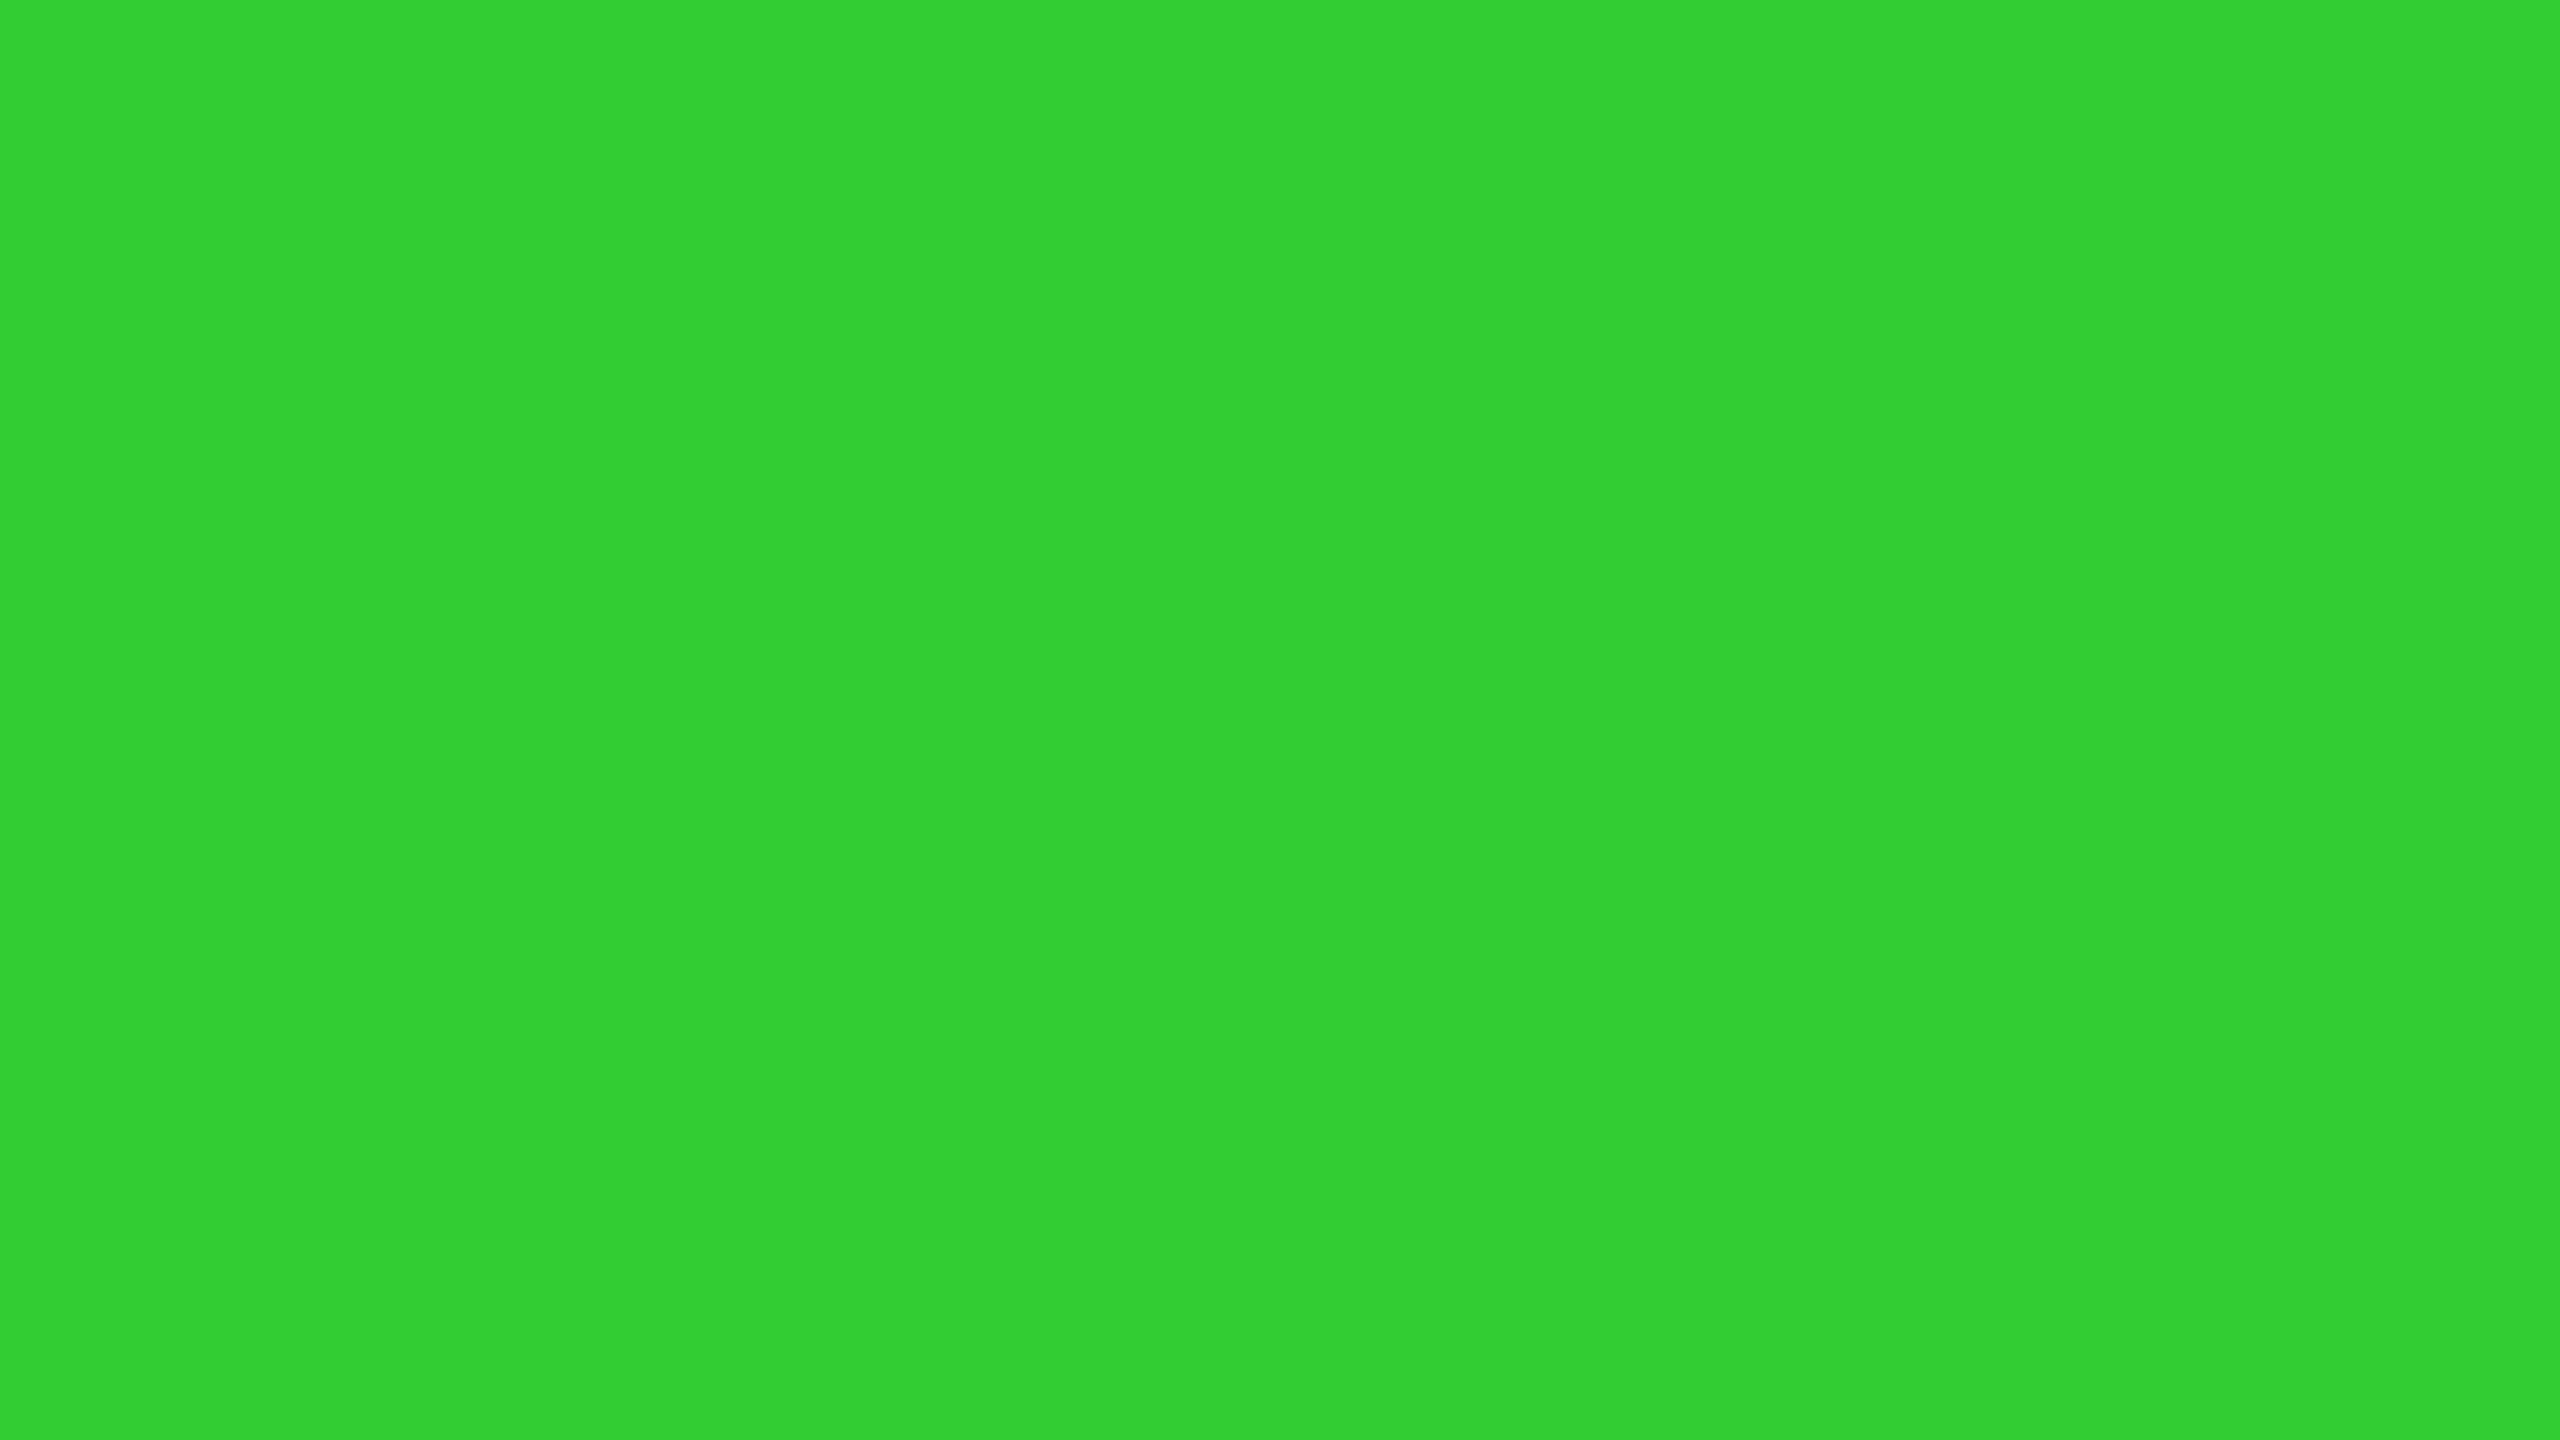 Free 2560x1440 resolution Lime Green solid color background view and